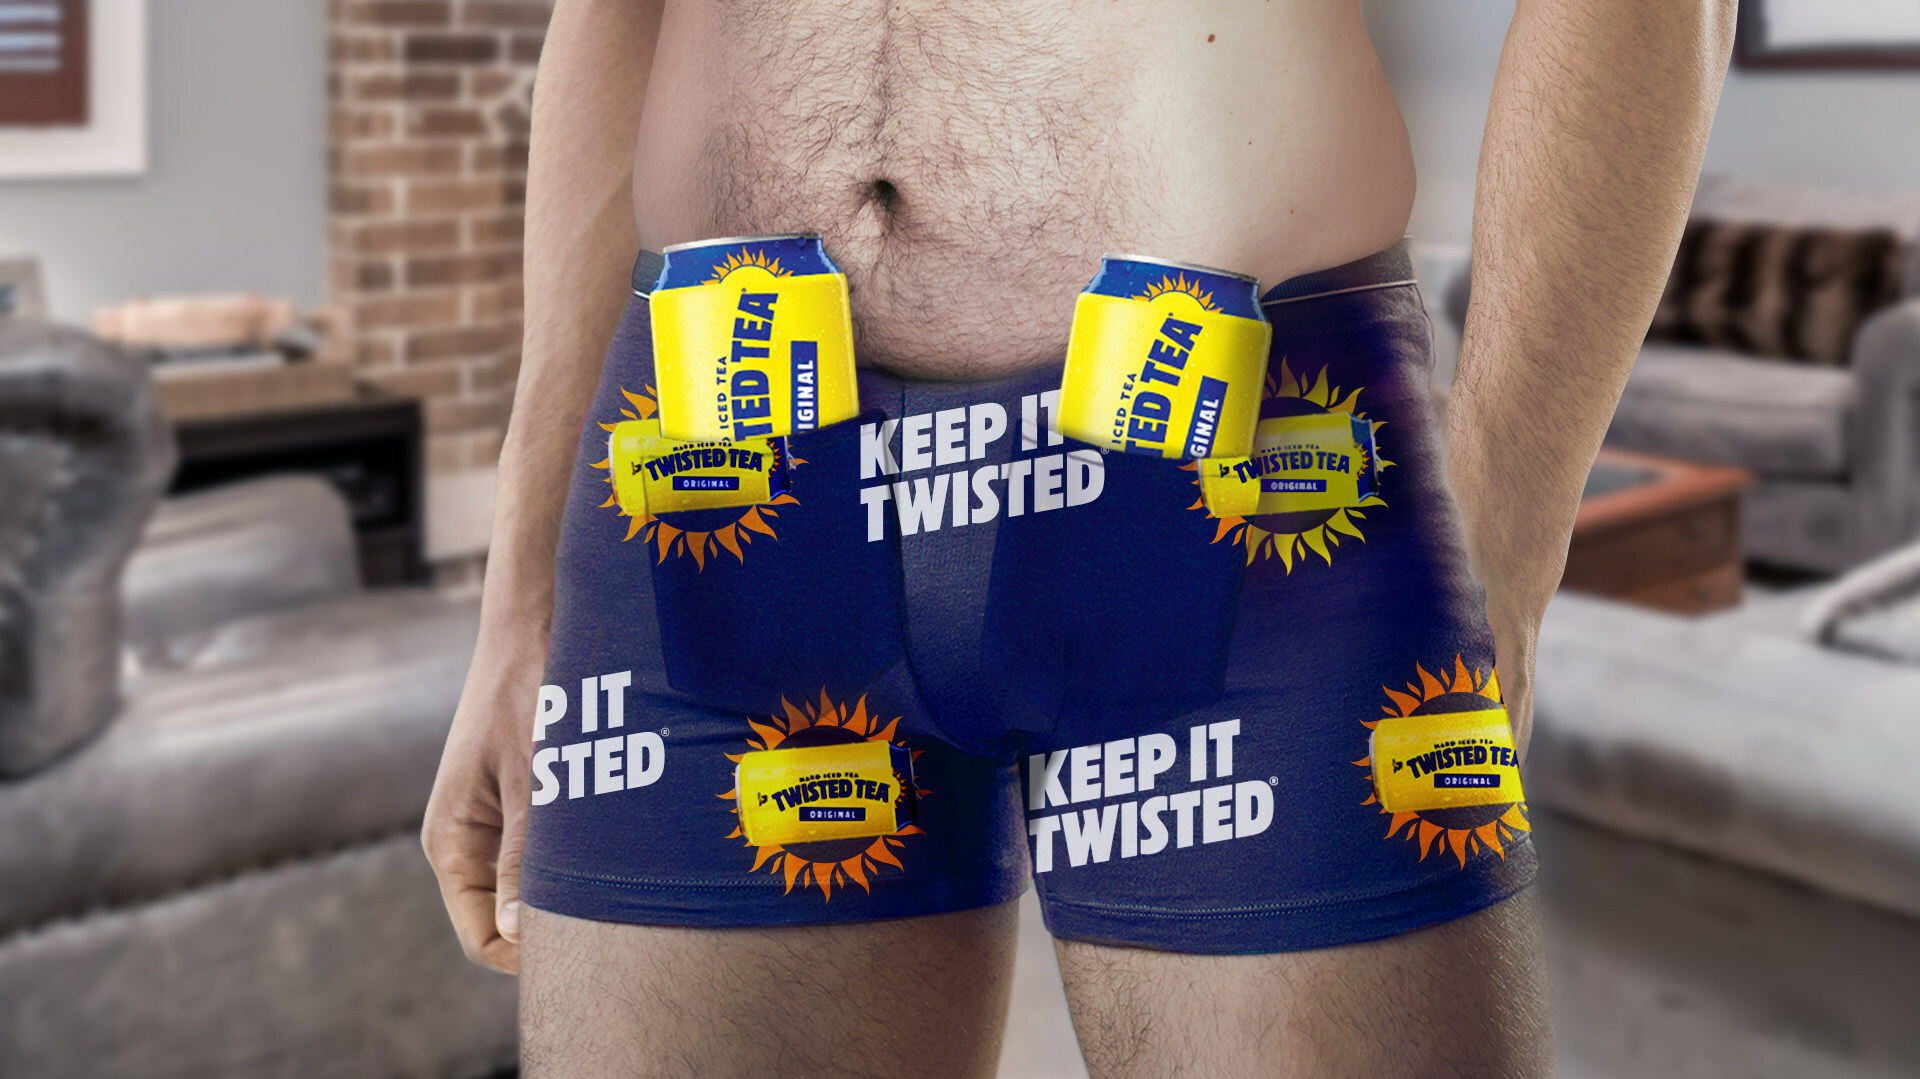 Twisted Tea VasectomUndies Provides Clutch Assist To Recently Snipped Fans